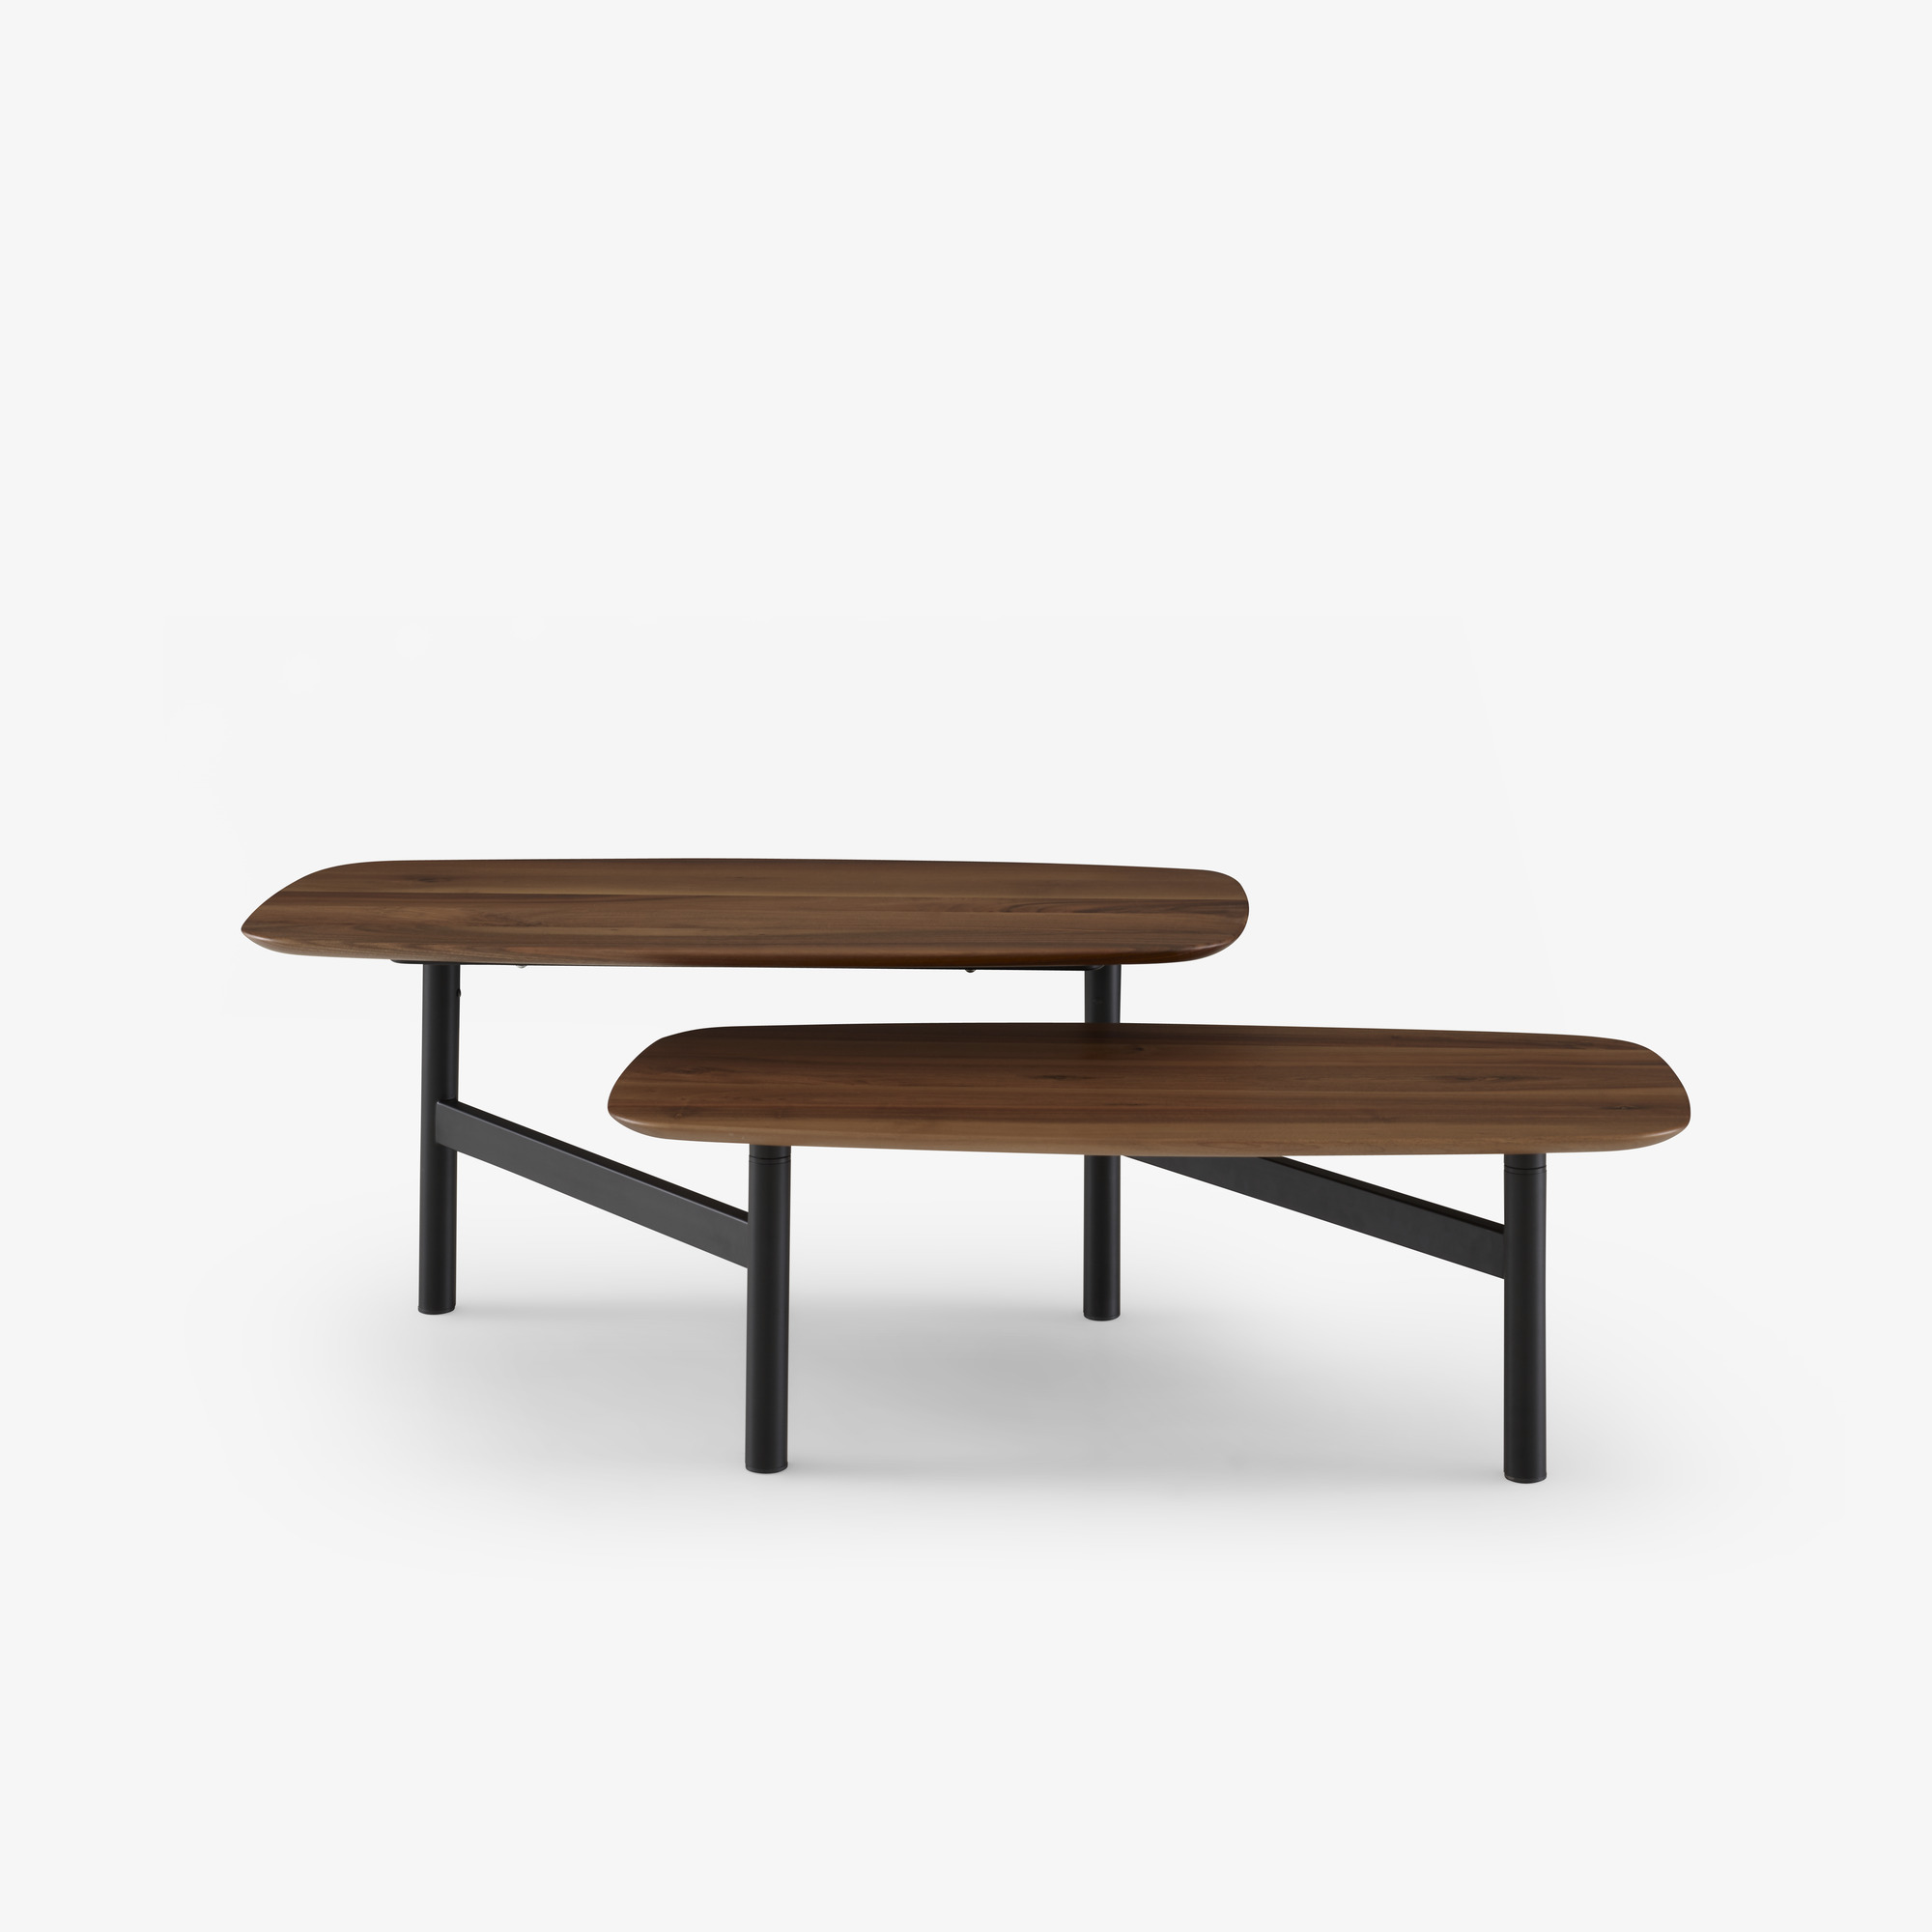 Image Low table european walnut top black lacquered base 1